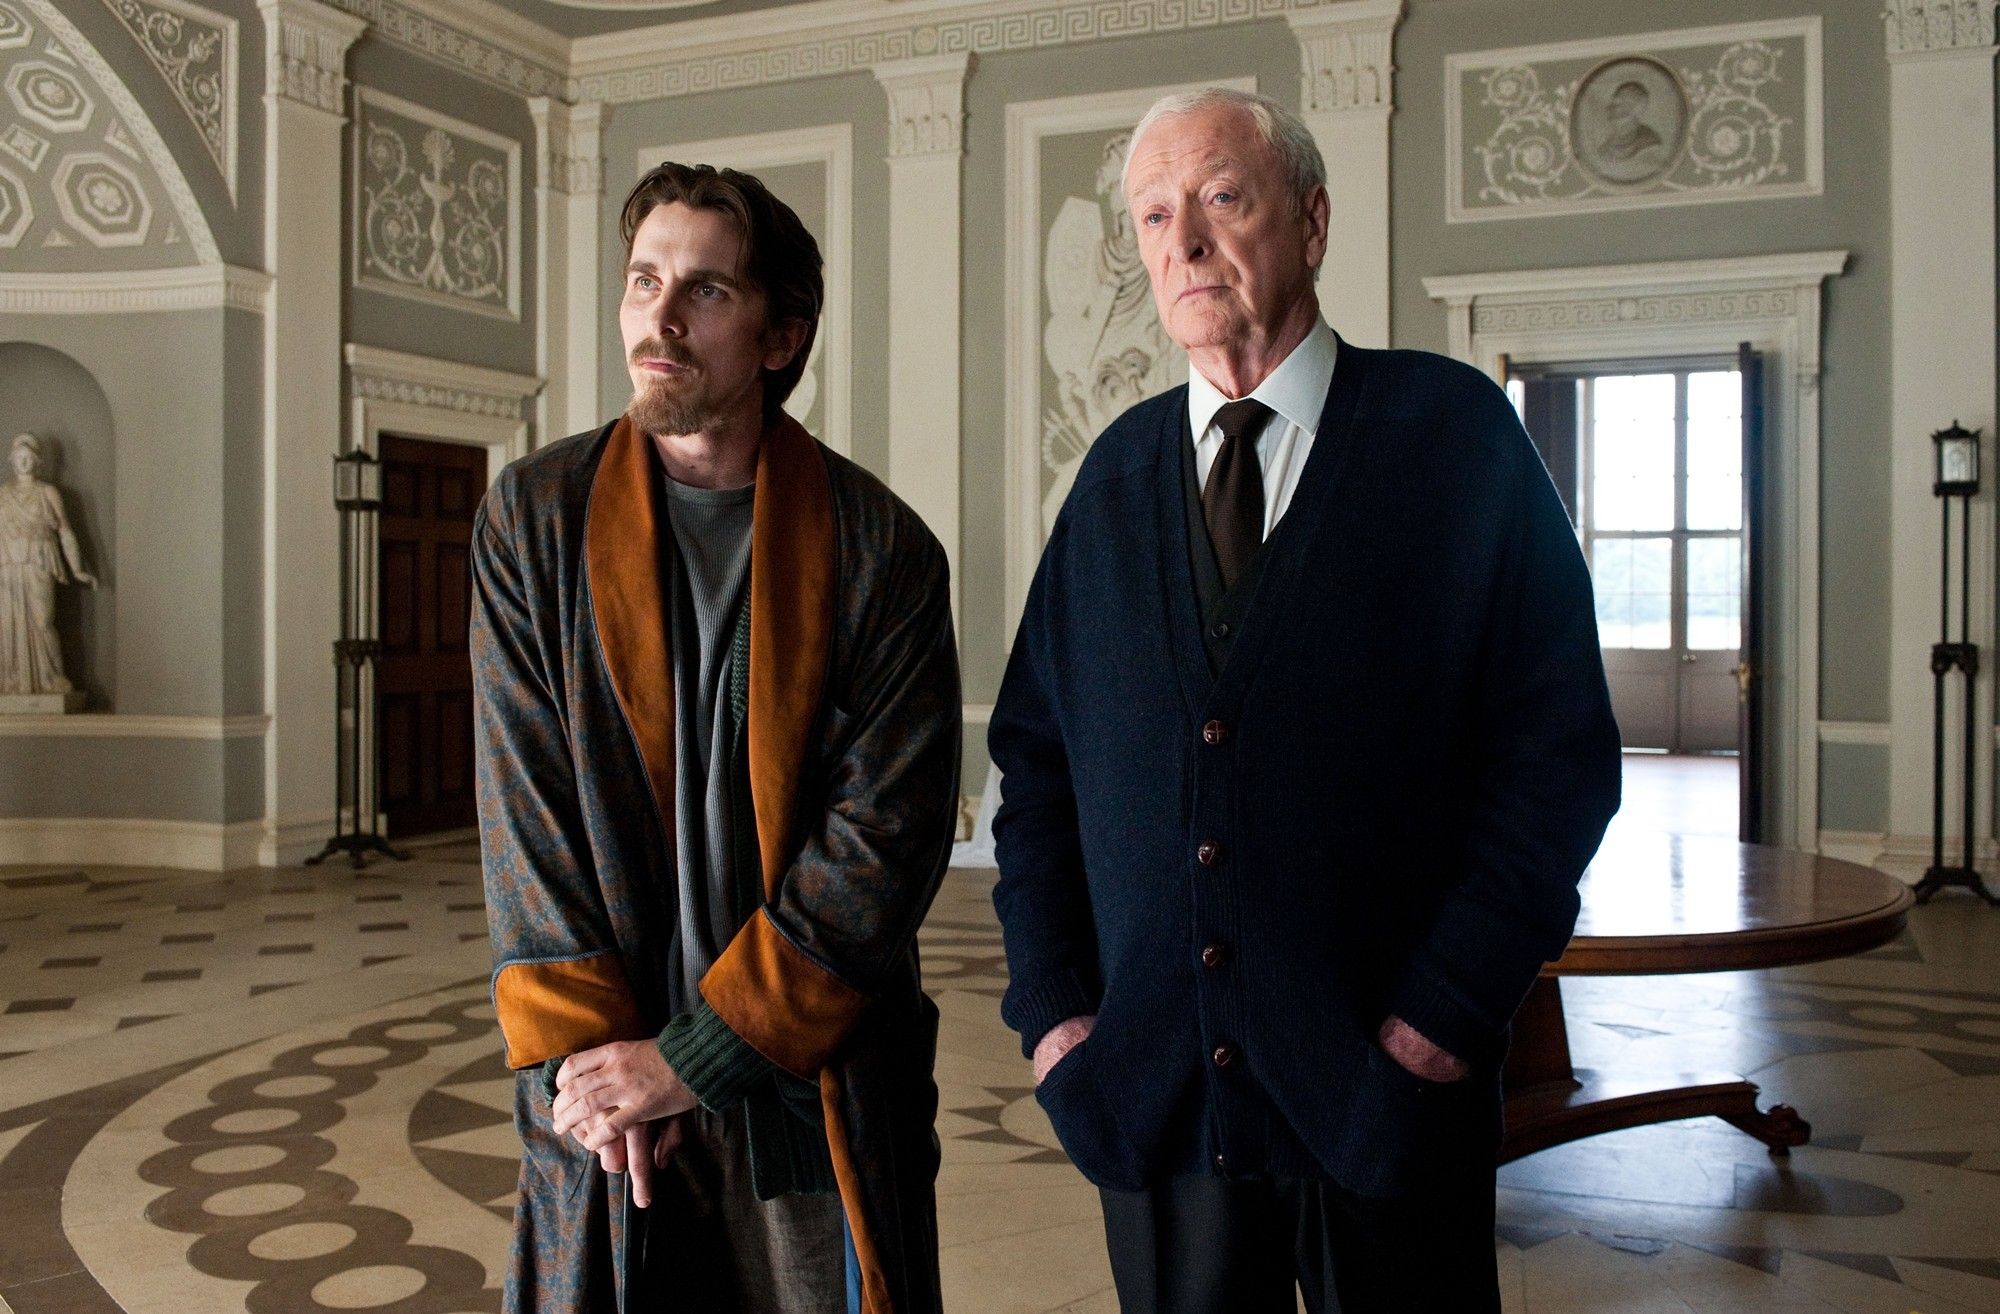 Christian Bale stars as Bruce Wayne/Batman and Michael Caine stars as Alfred in Warner Bros. Pictures' The Dark Knight Rises (2012)